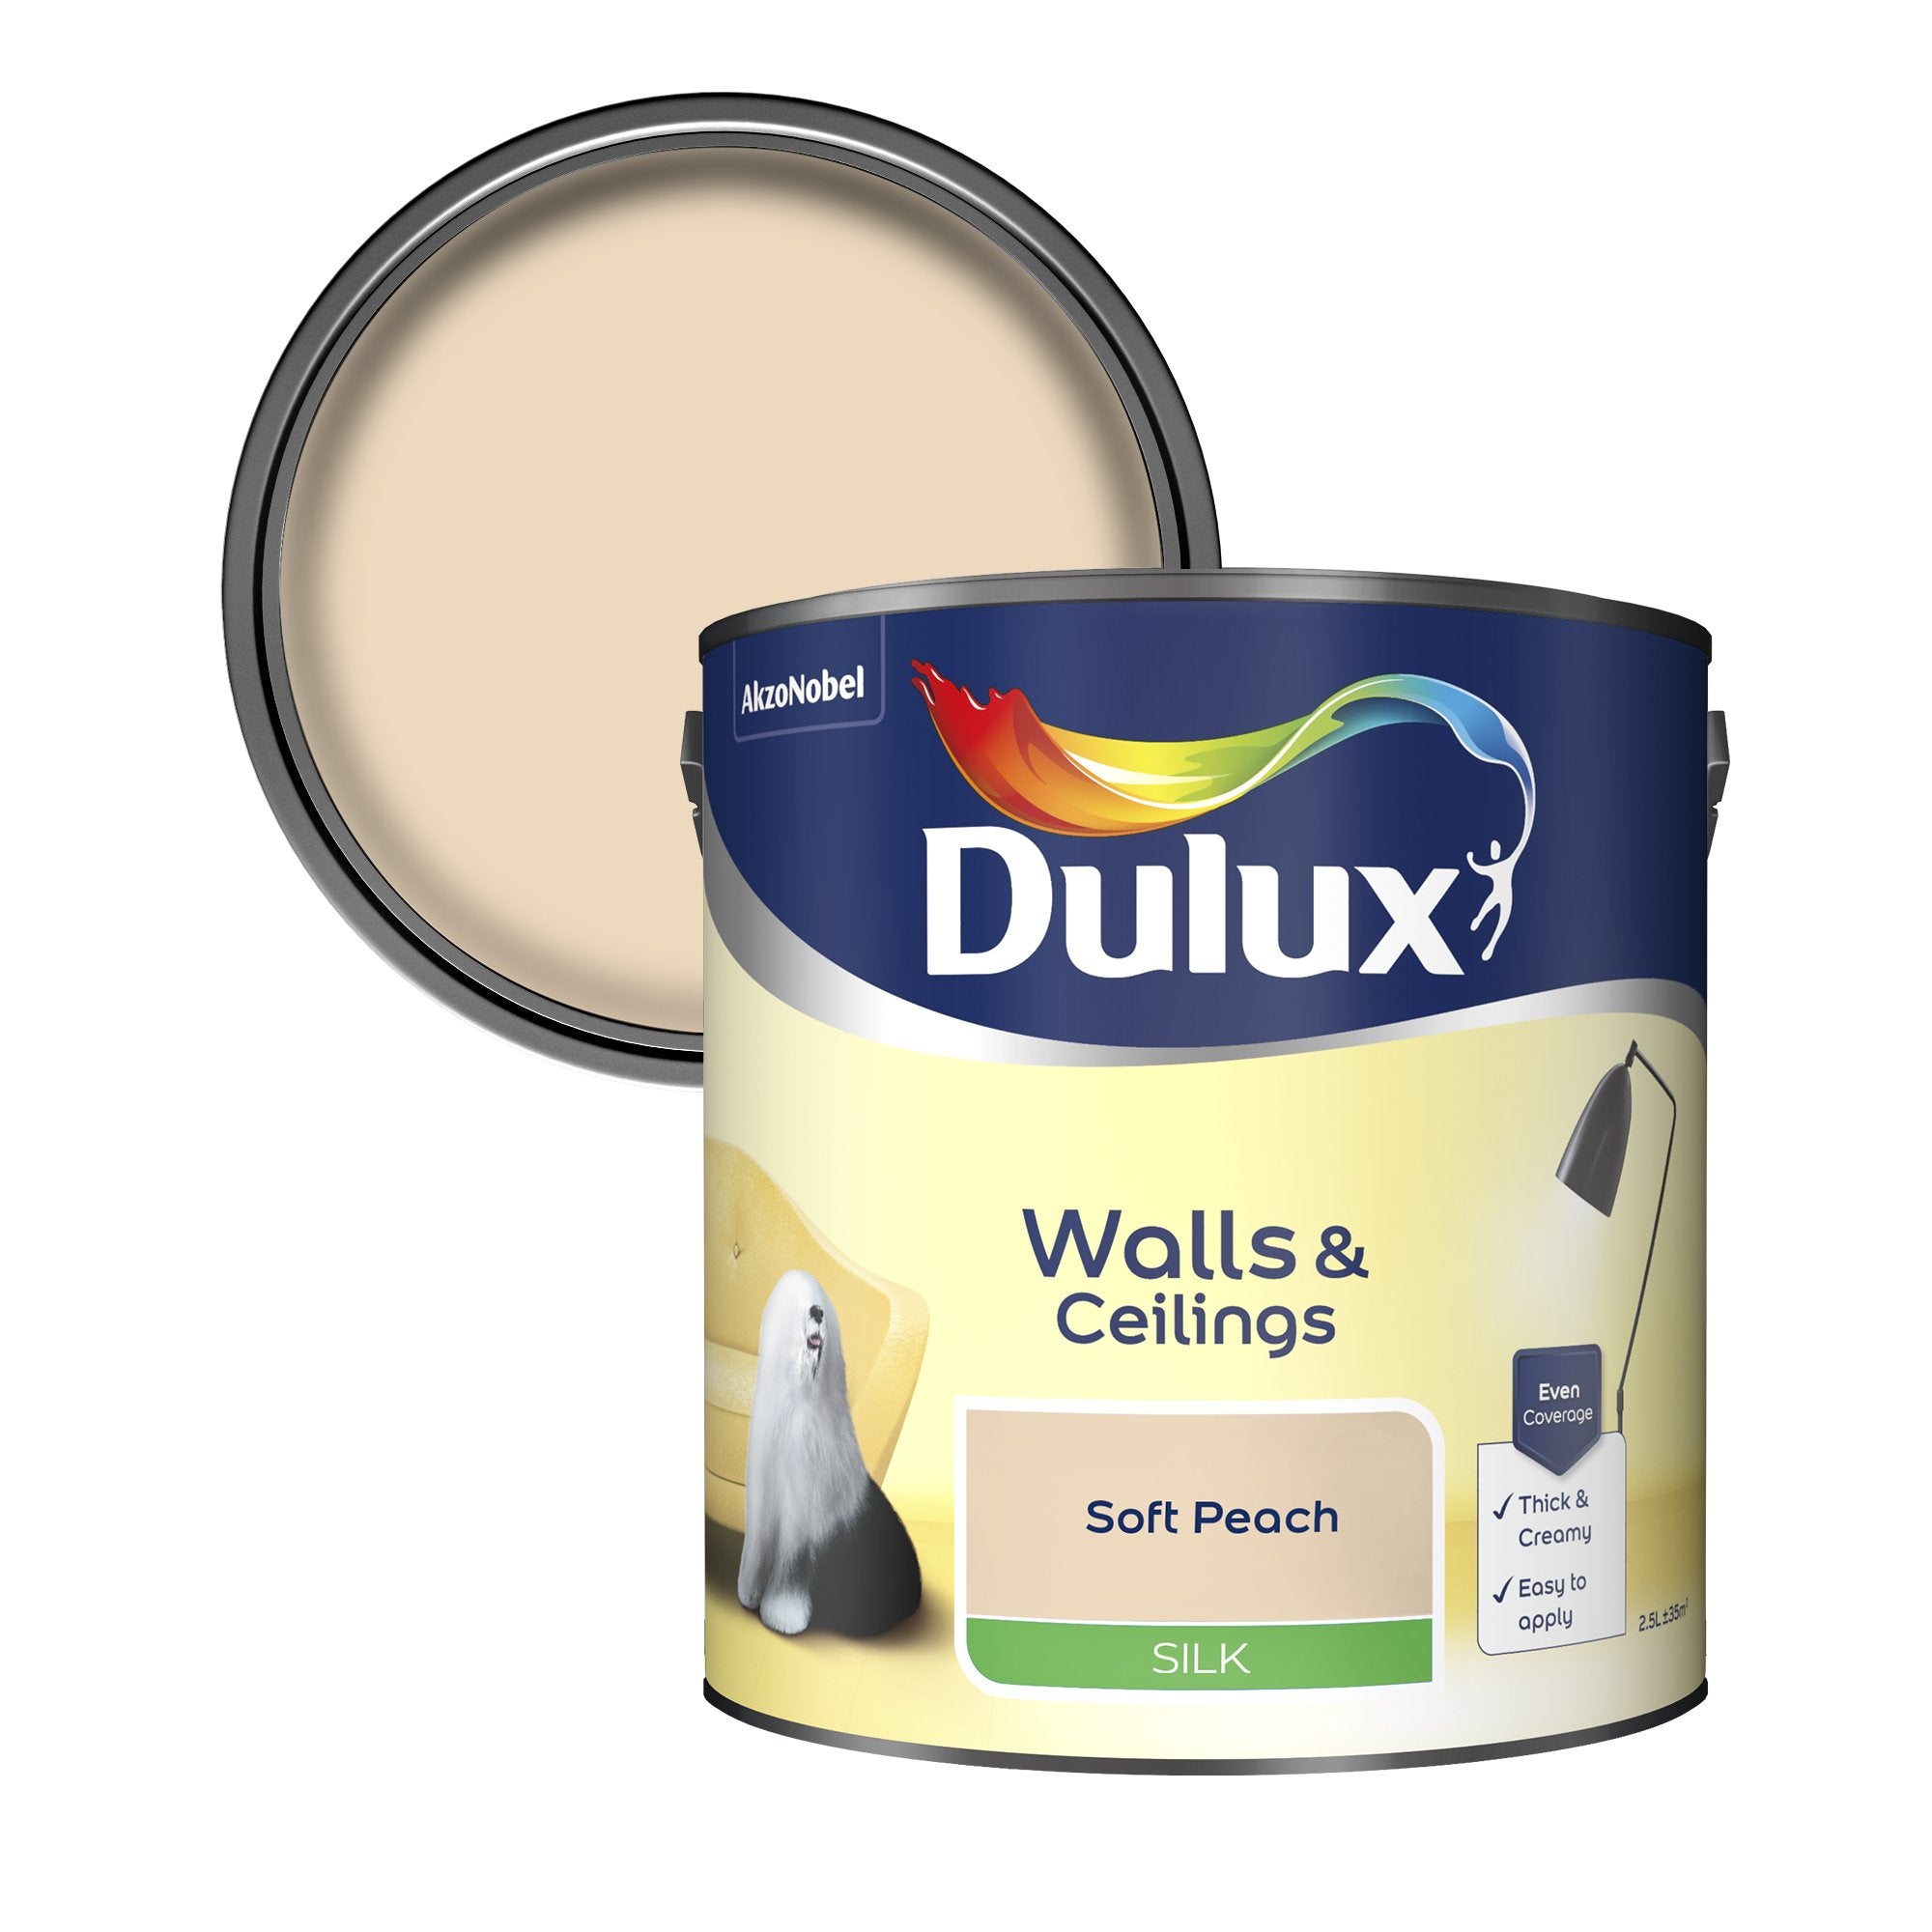 Dulux-Silk-Emulsion-Paint-For-Walls-And-Ceilings-Soft-Peach-2.5L